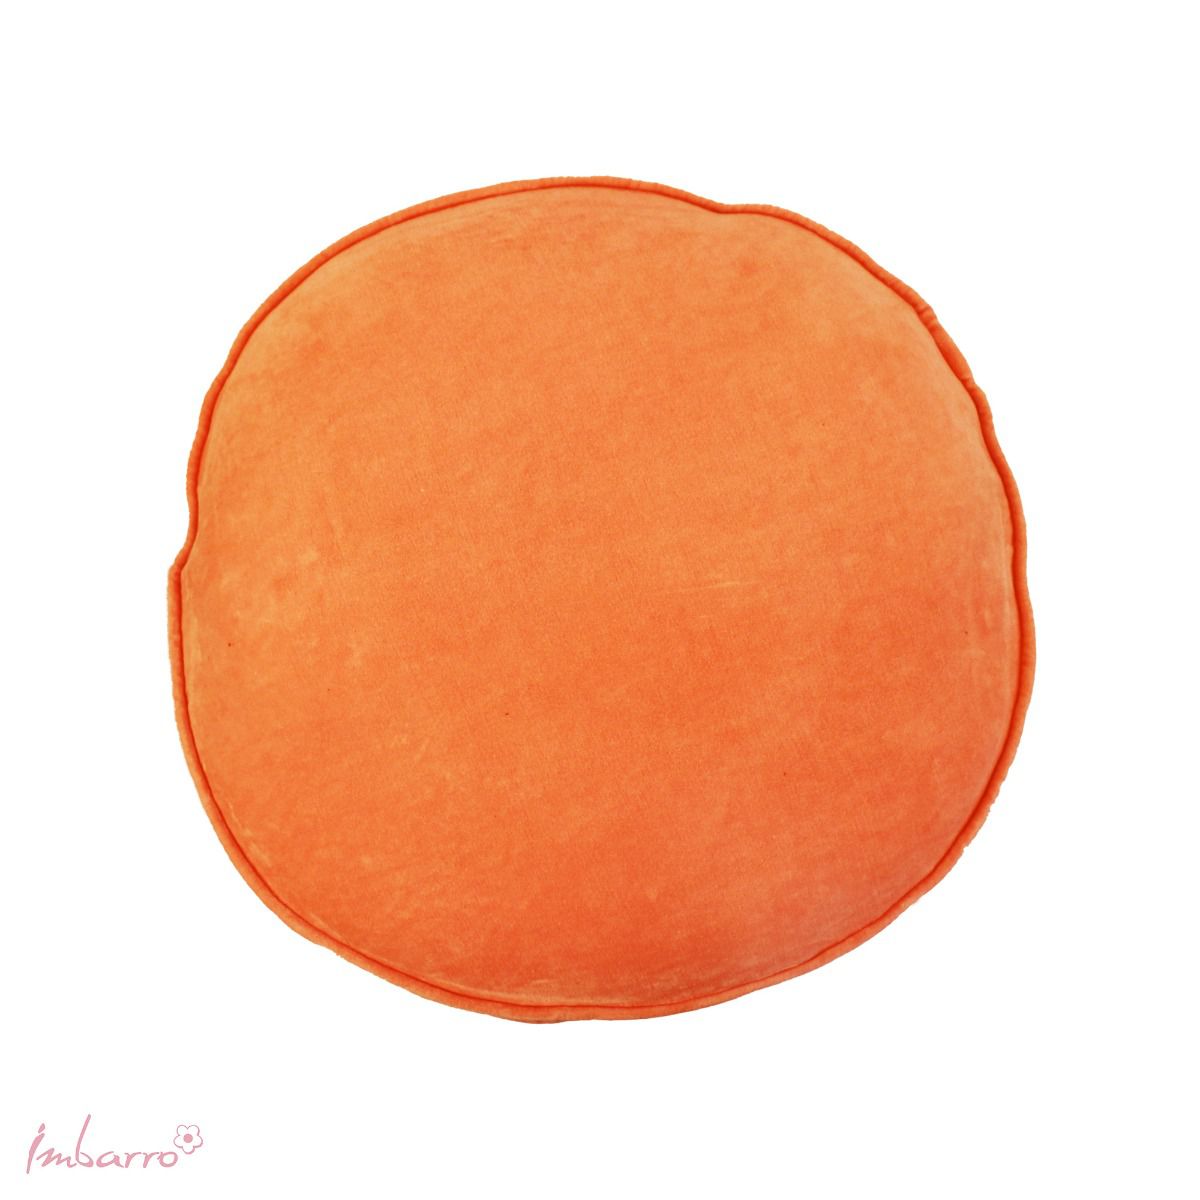 A plain round 45cm velvet cushion in orange with piping in the same velvet colour. Plain cushions are great on a couch, bench or armchair. Even on a bed, and especially striking when mixed with a patterned cushion or on a patterned couch or chair. 